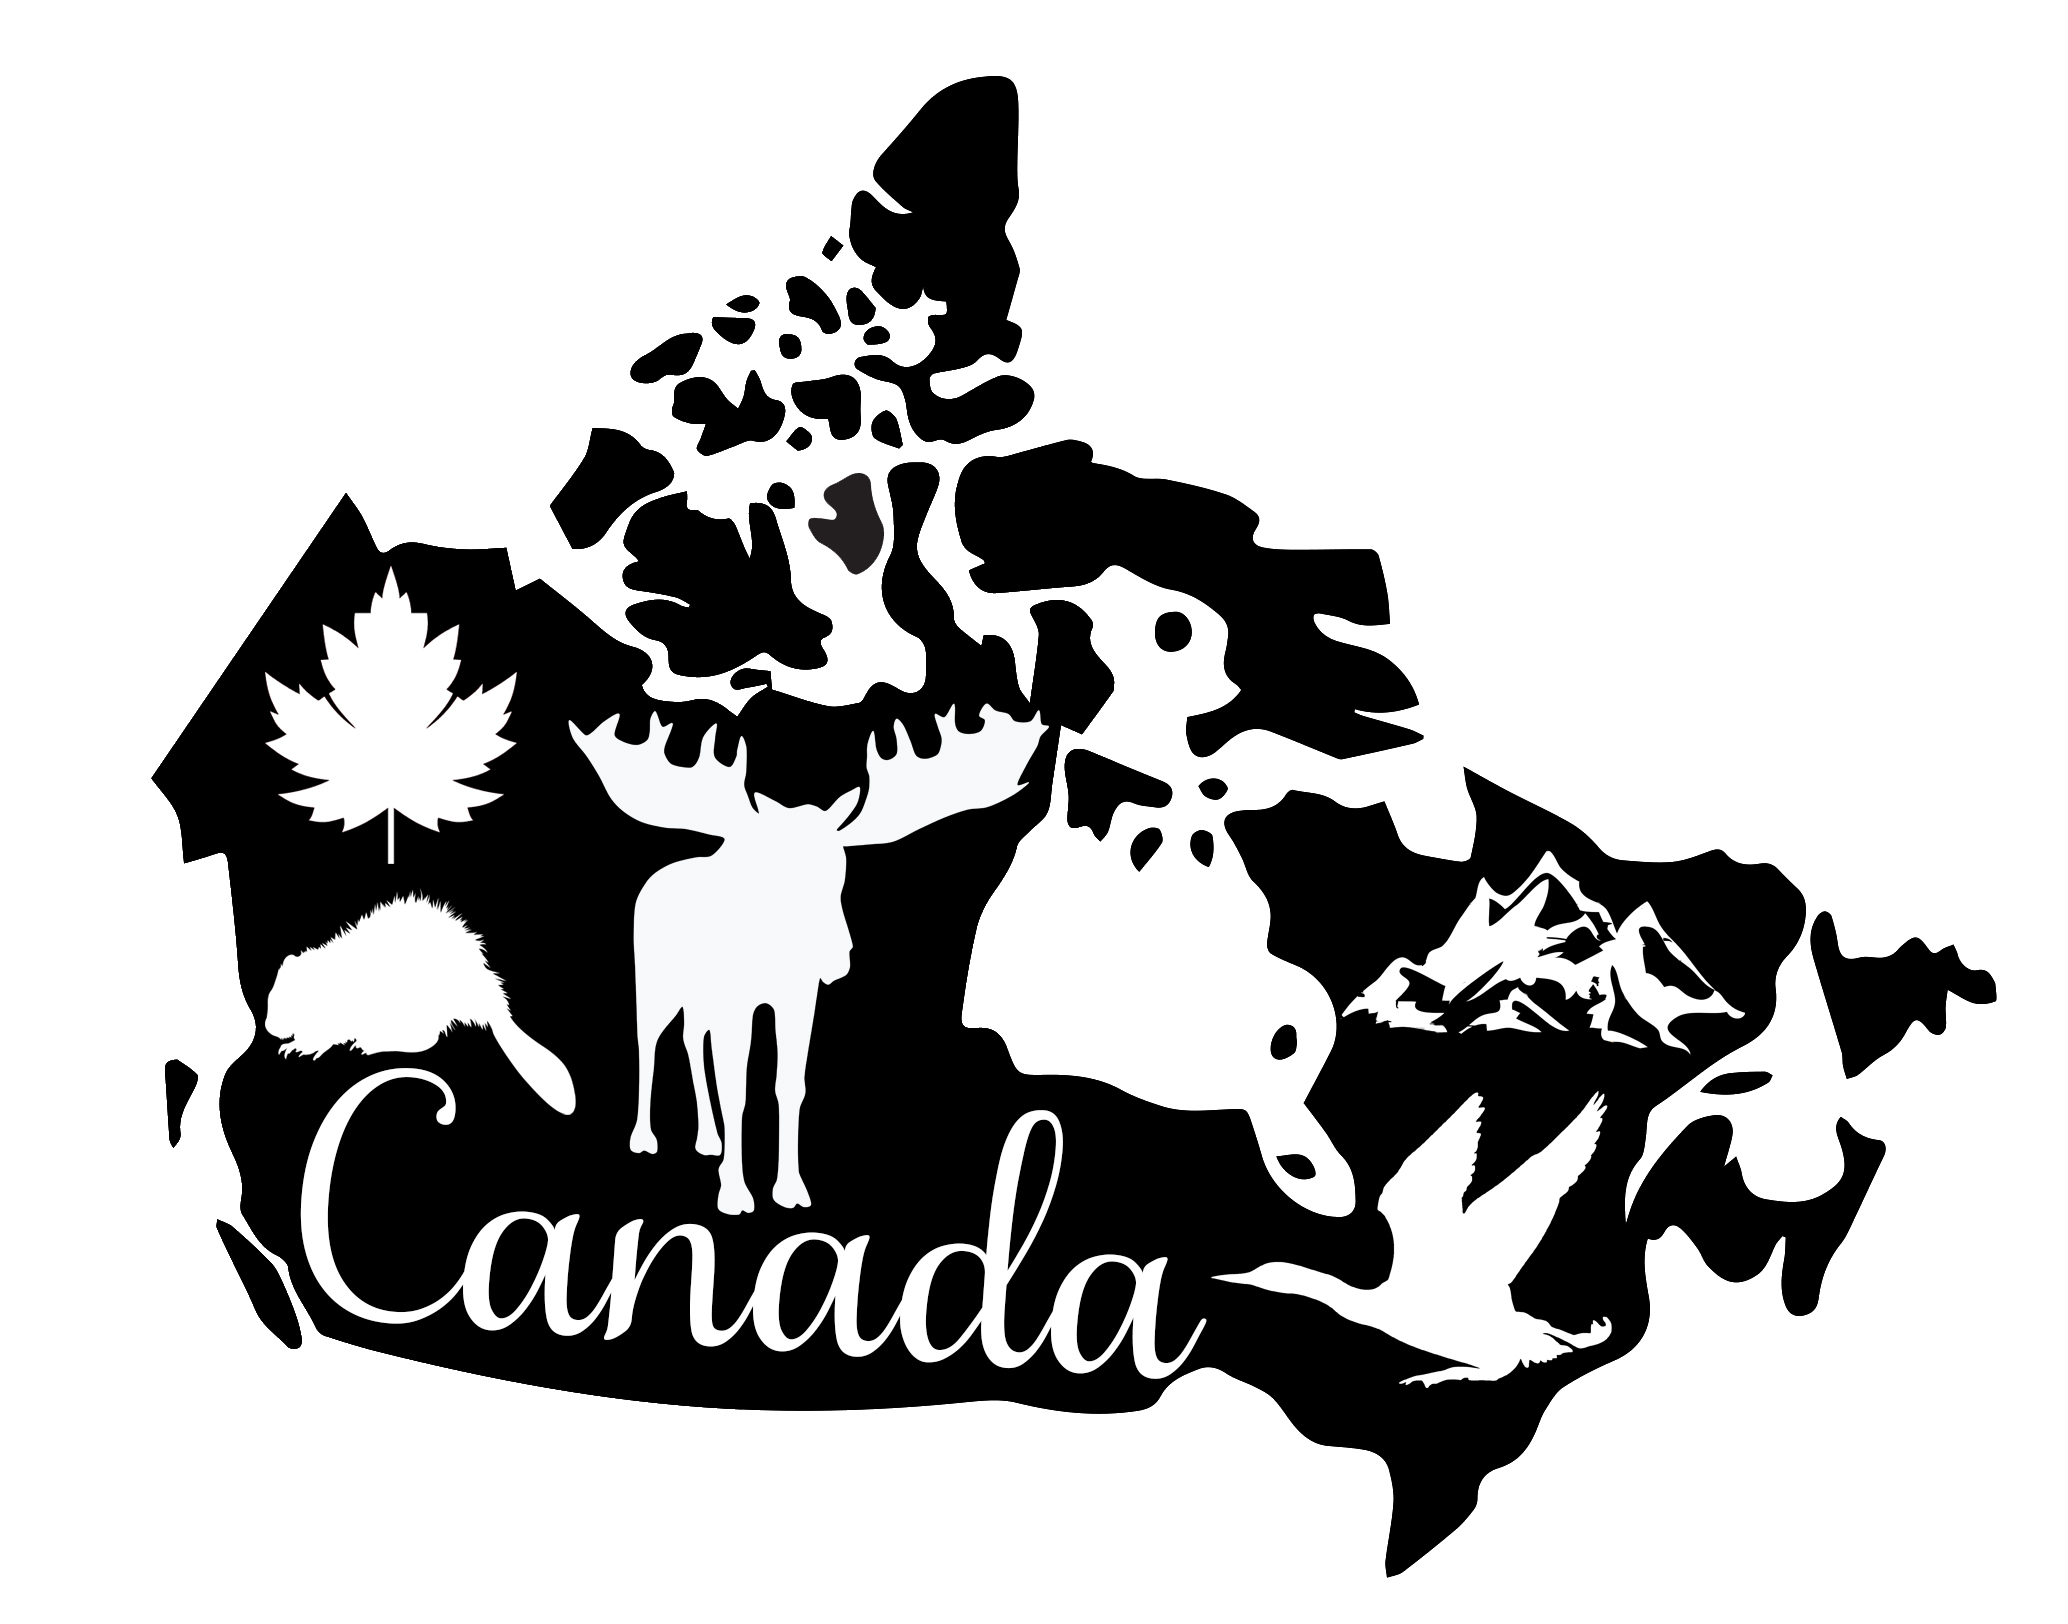 Canada is known for many things and in this Free SVG File I have used The Maple Leaf, Moose and Beaver to name but a few! Enjoy our little tribute to Canada.